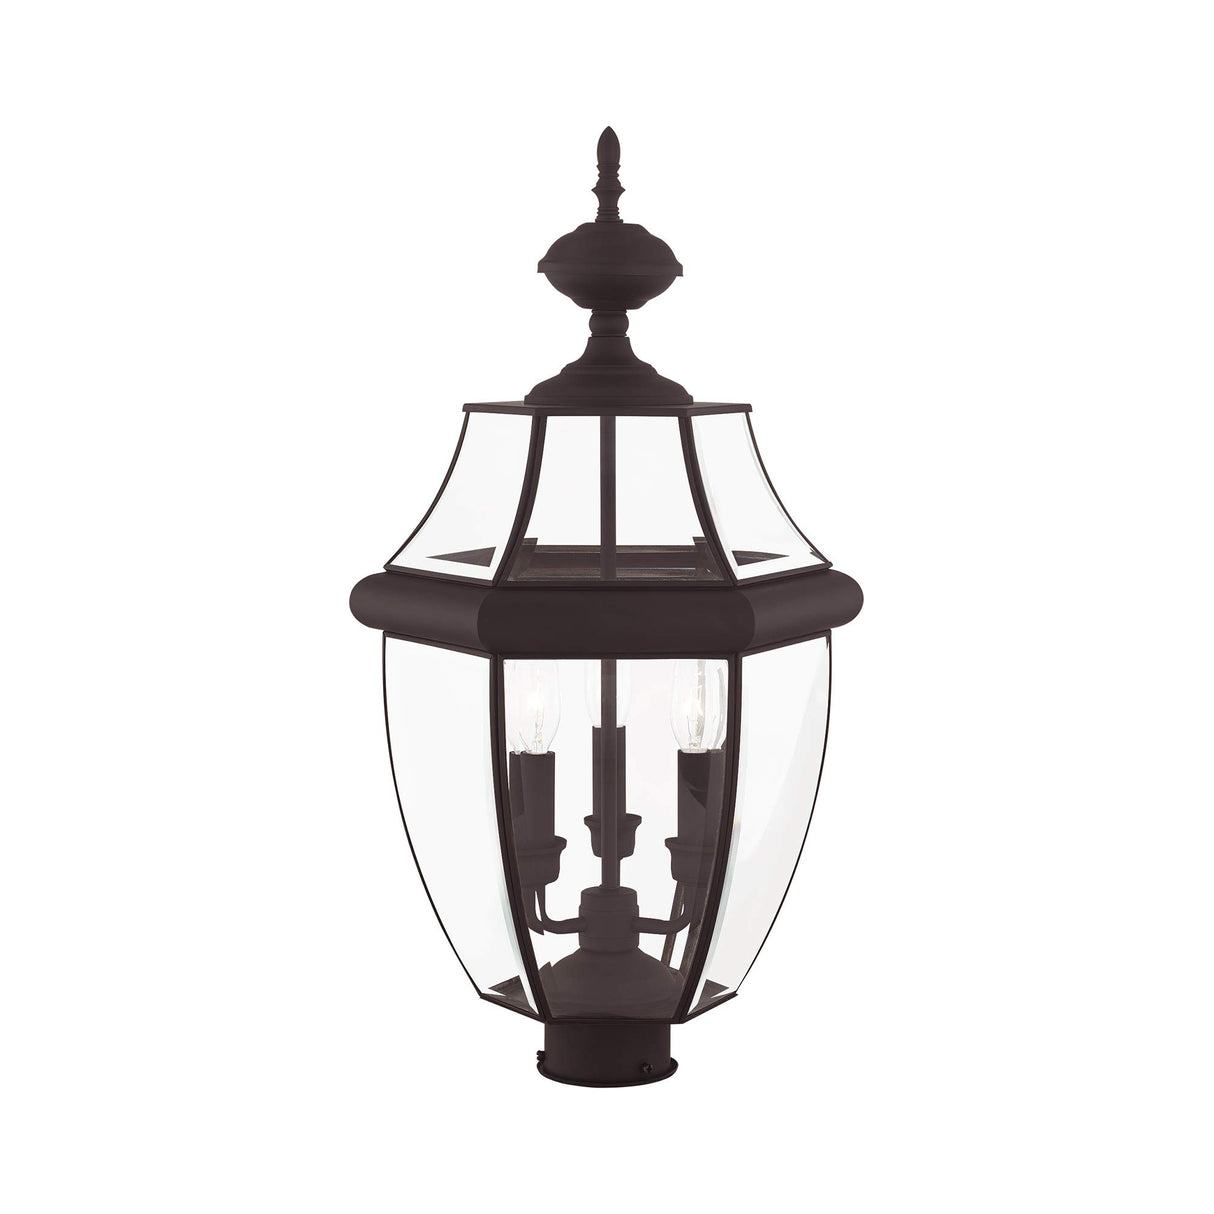 Livex Lighting 2354-07 Monterey 3 Light Outdoor Bronze Finish Solid Brass Post Head with Clear Beveled Glass